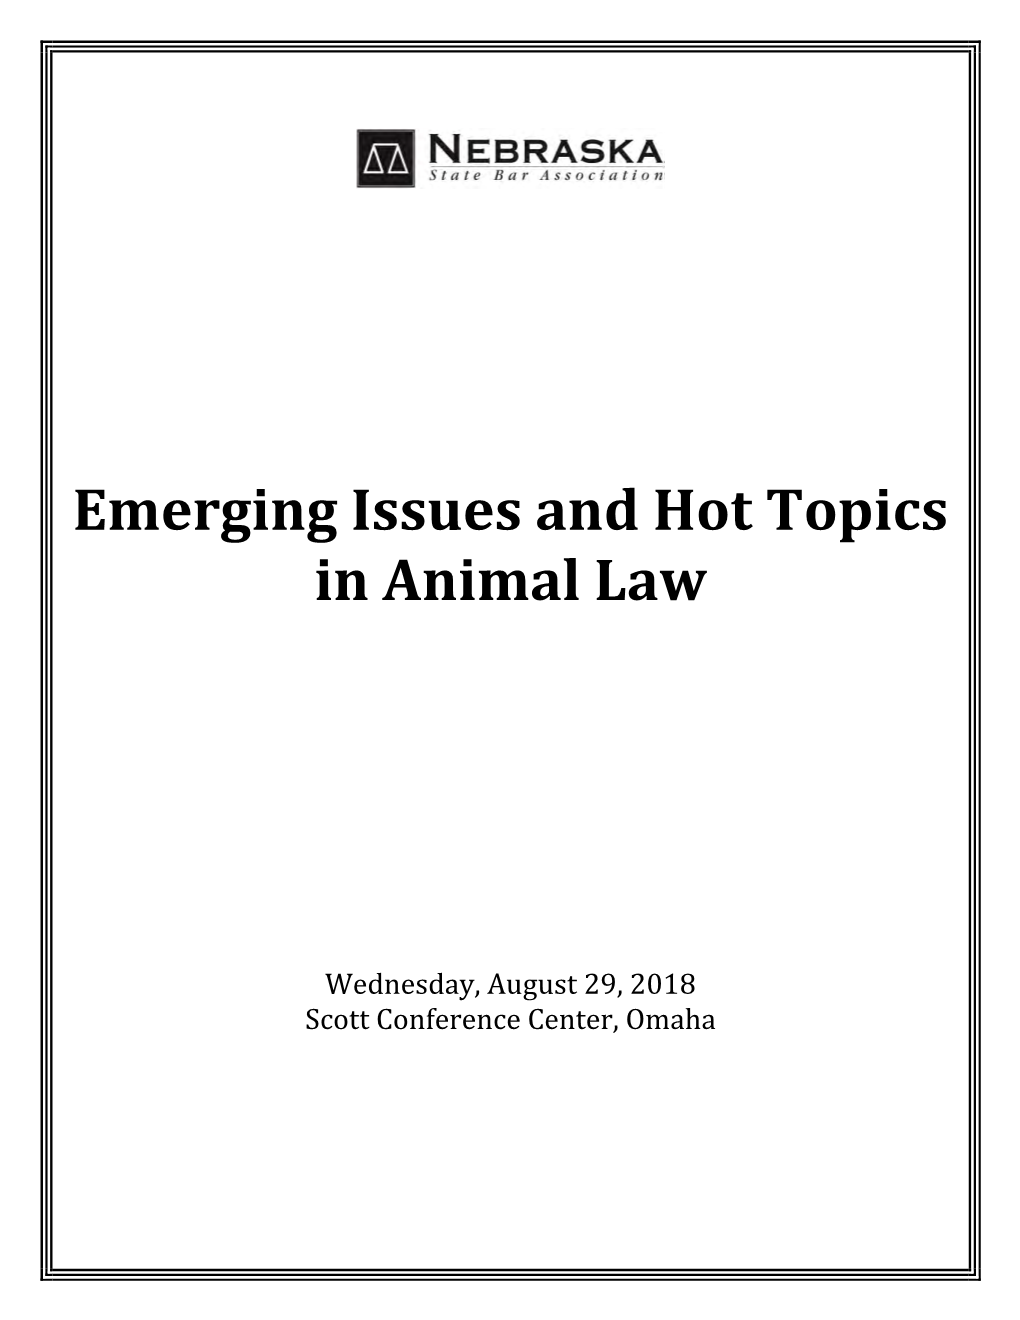 Emerging Issues and Hot Topics in Animal Law